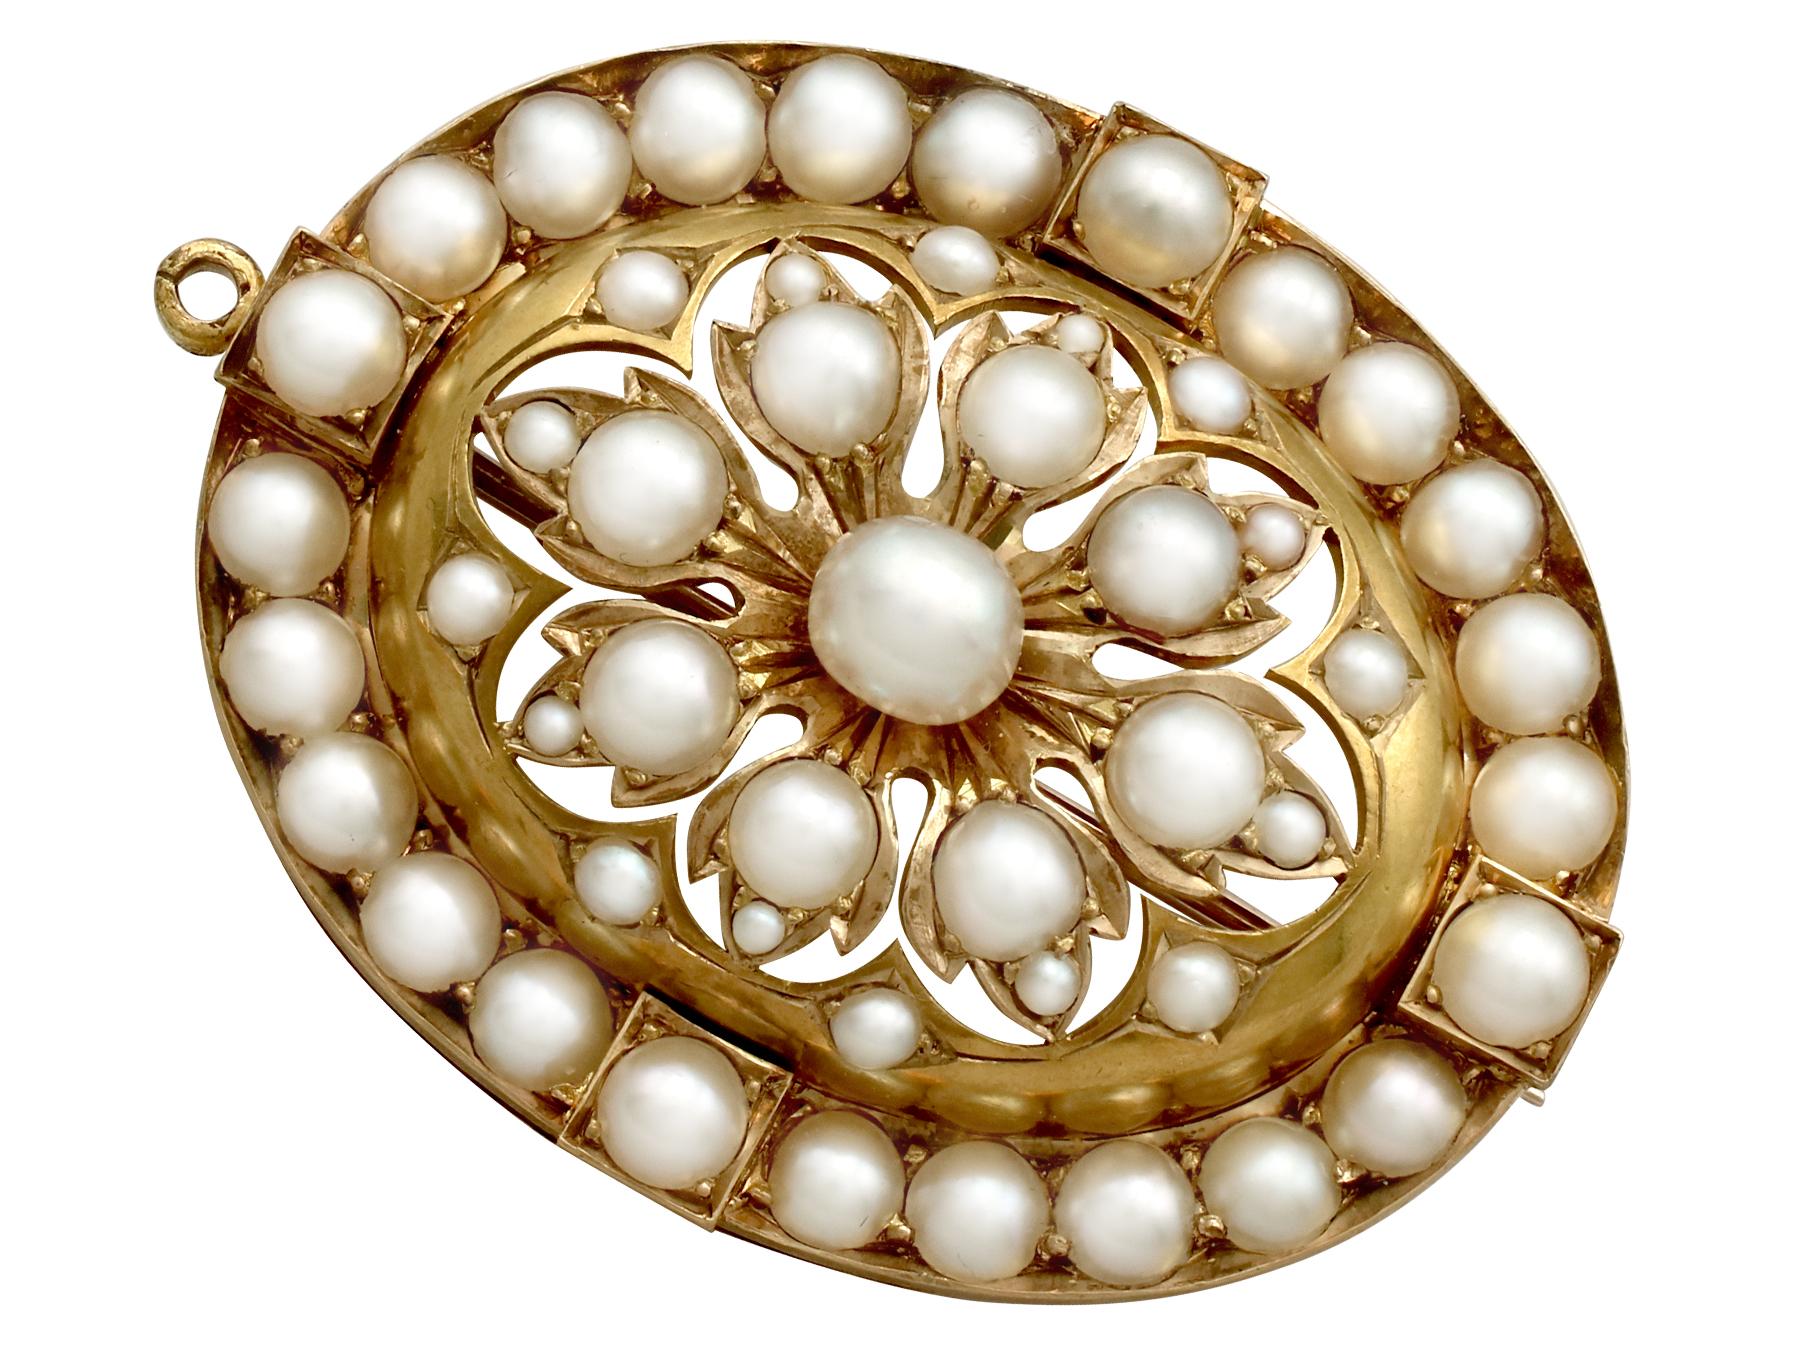 A stunning antique Victorian seed pearl and 18 karat yellow gold pendant / brooch with 9k gold chain; part of our Victorian jewelry collections.

This stunning, fine and impressive Victorian pendant has been crafted in 18k yellow gold with a